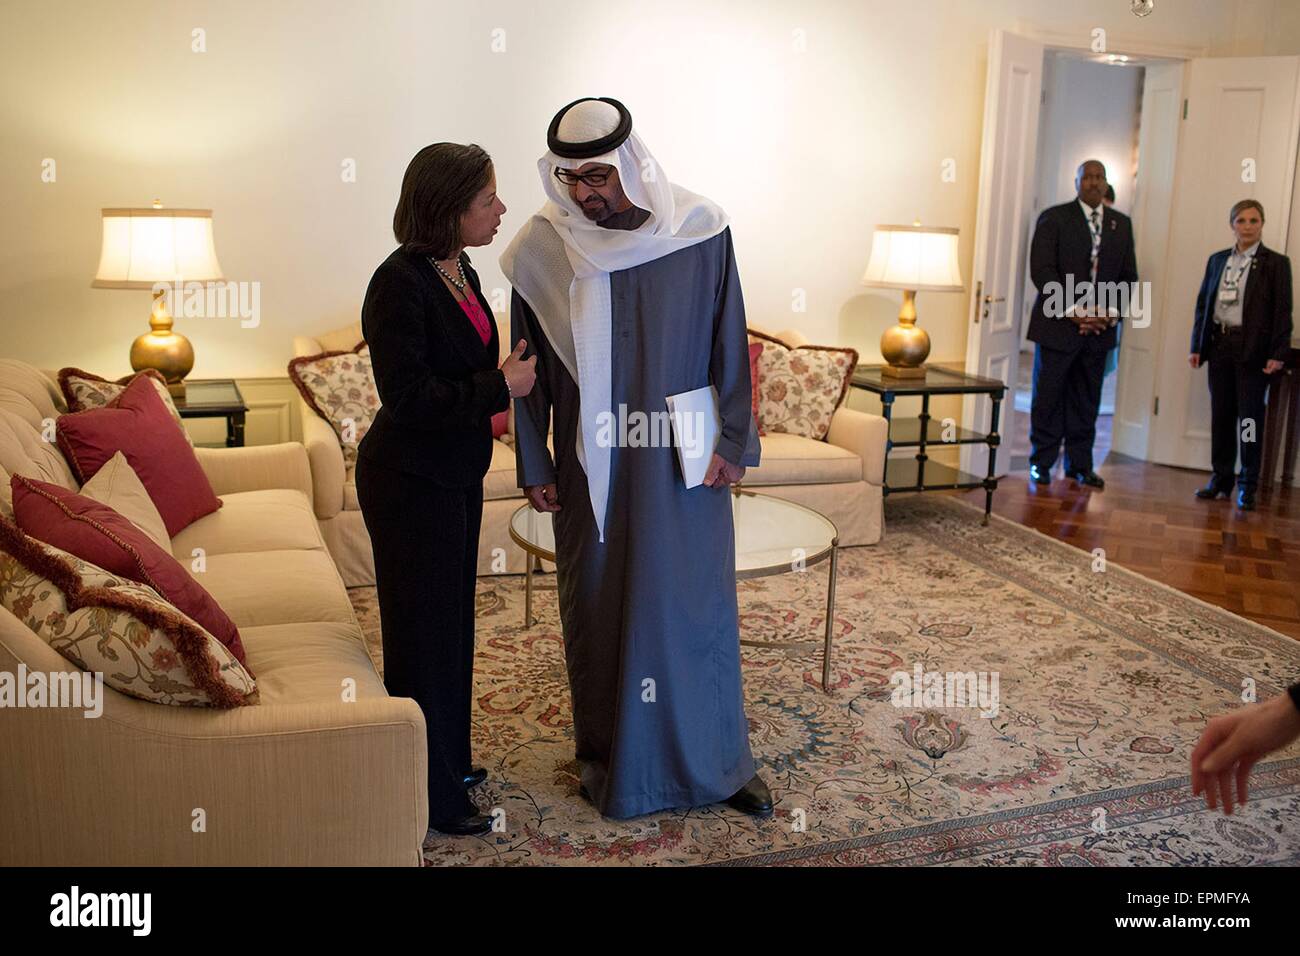 U.S. National Security Advisor Susan E. Rice talks with Sheikh Mohammed bin Zayed Al Nahyan, Crown Prince of Abu Dhabi and Deputy Supreme Commander of the United Arab Emirates Armed Forces at the U.S. Ambassador's residence March 25, 2014 in The Hague, Netherlands. Stock Photo